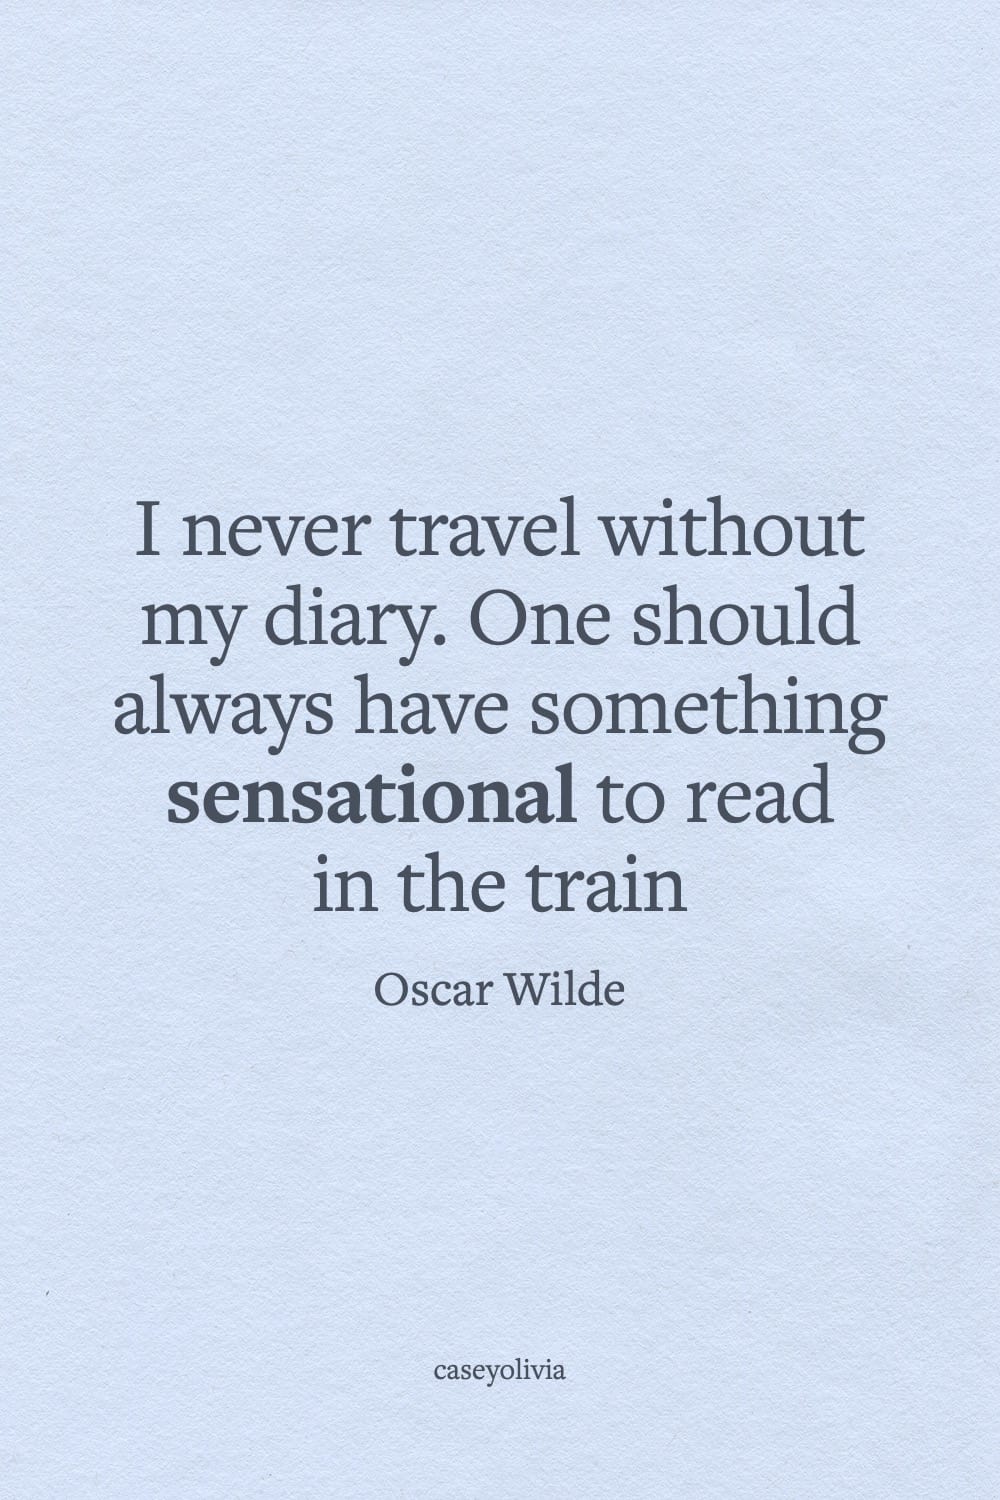 sarcastic quote about traveling with a dairy